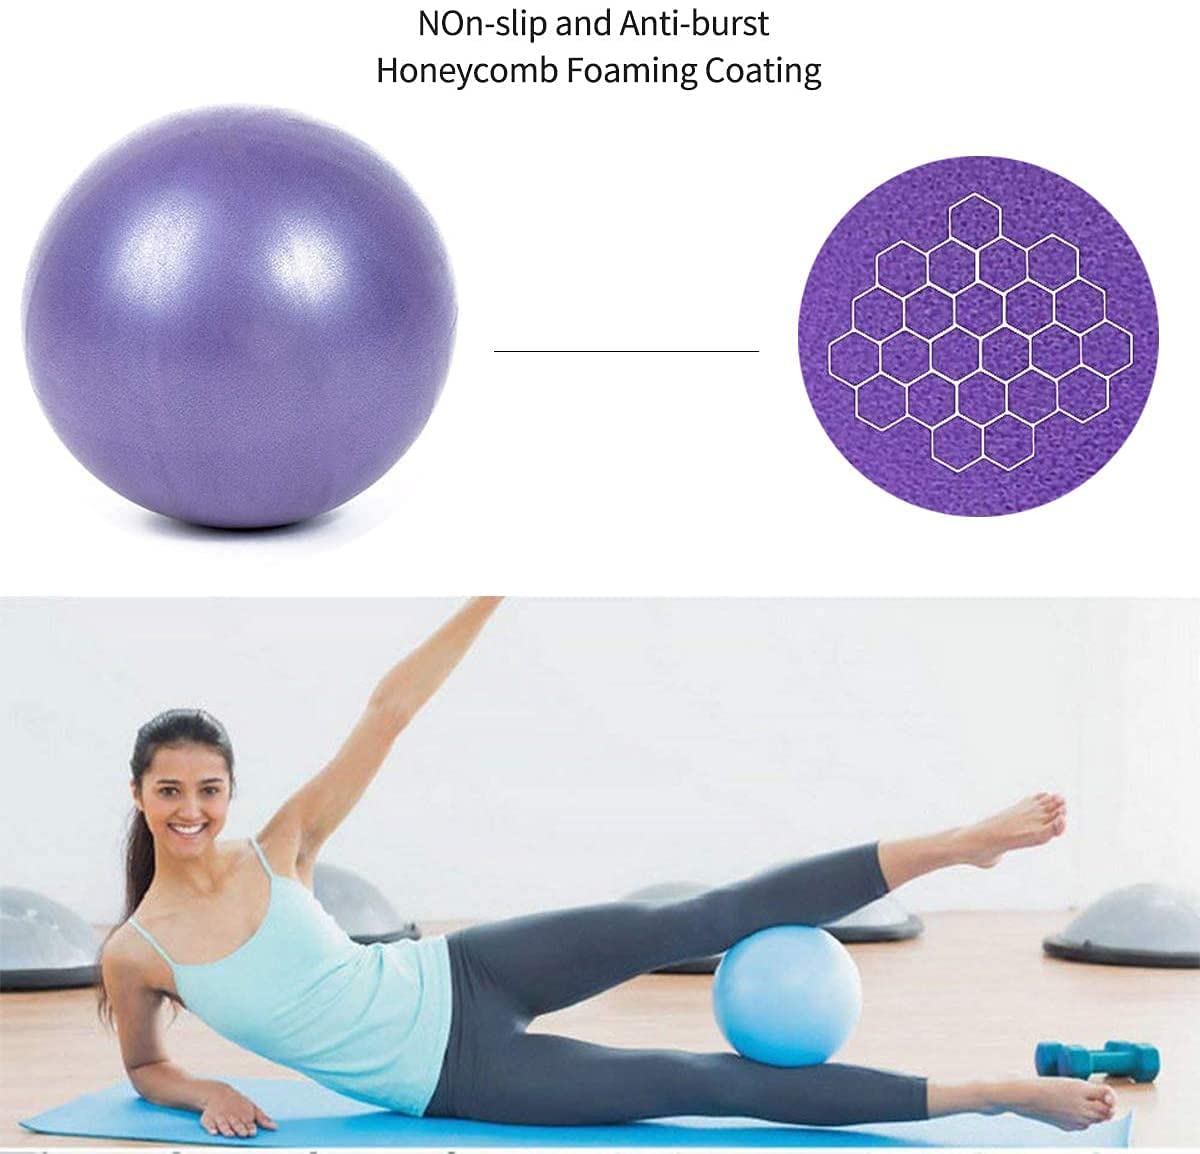 XIECCX Mini Yoga Balls Exercise Pilates Ball Therapy Ball Balance Ball Bender Ball Barre Equipment 1PC for Home Stability Squishy Training PhysicalCore Training with Inflatable Straw